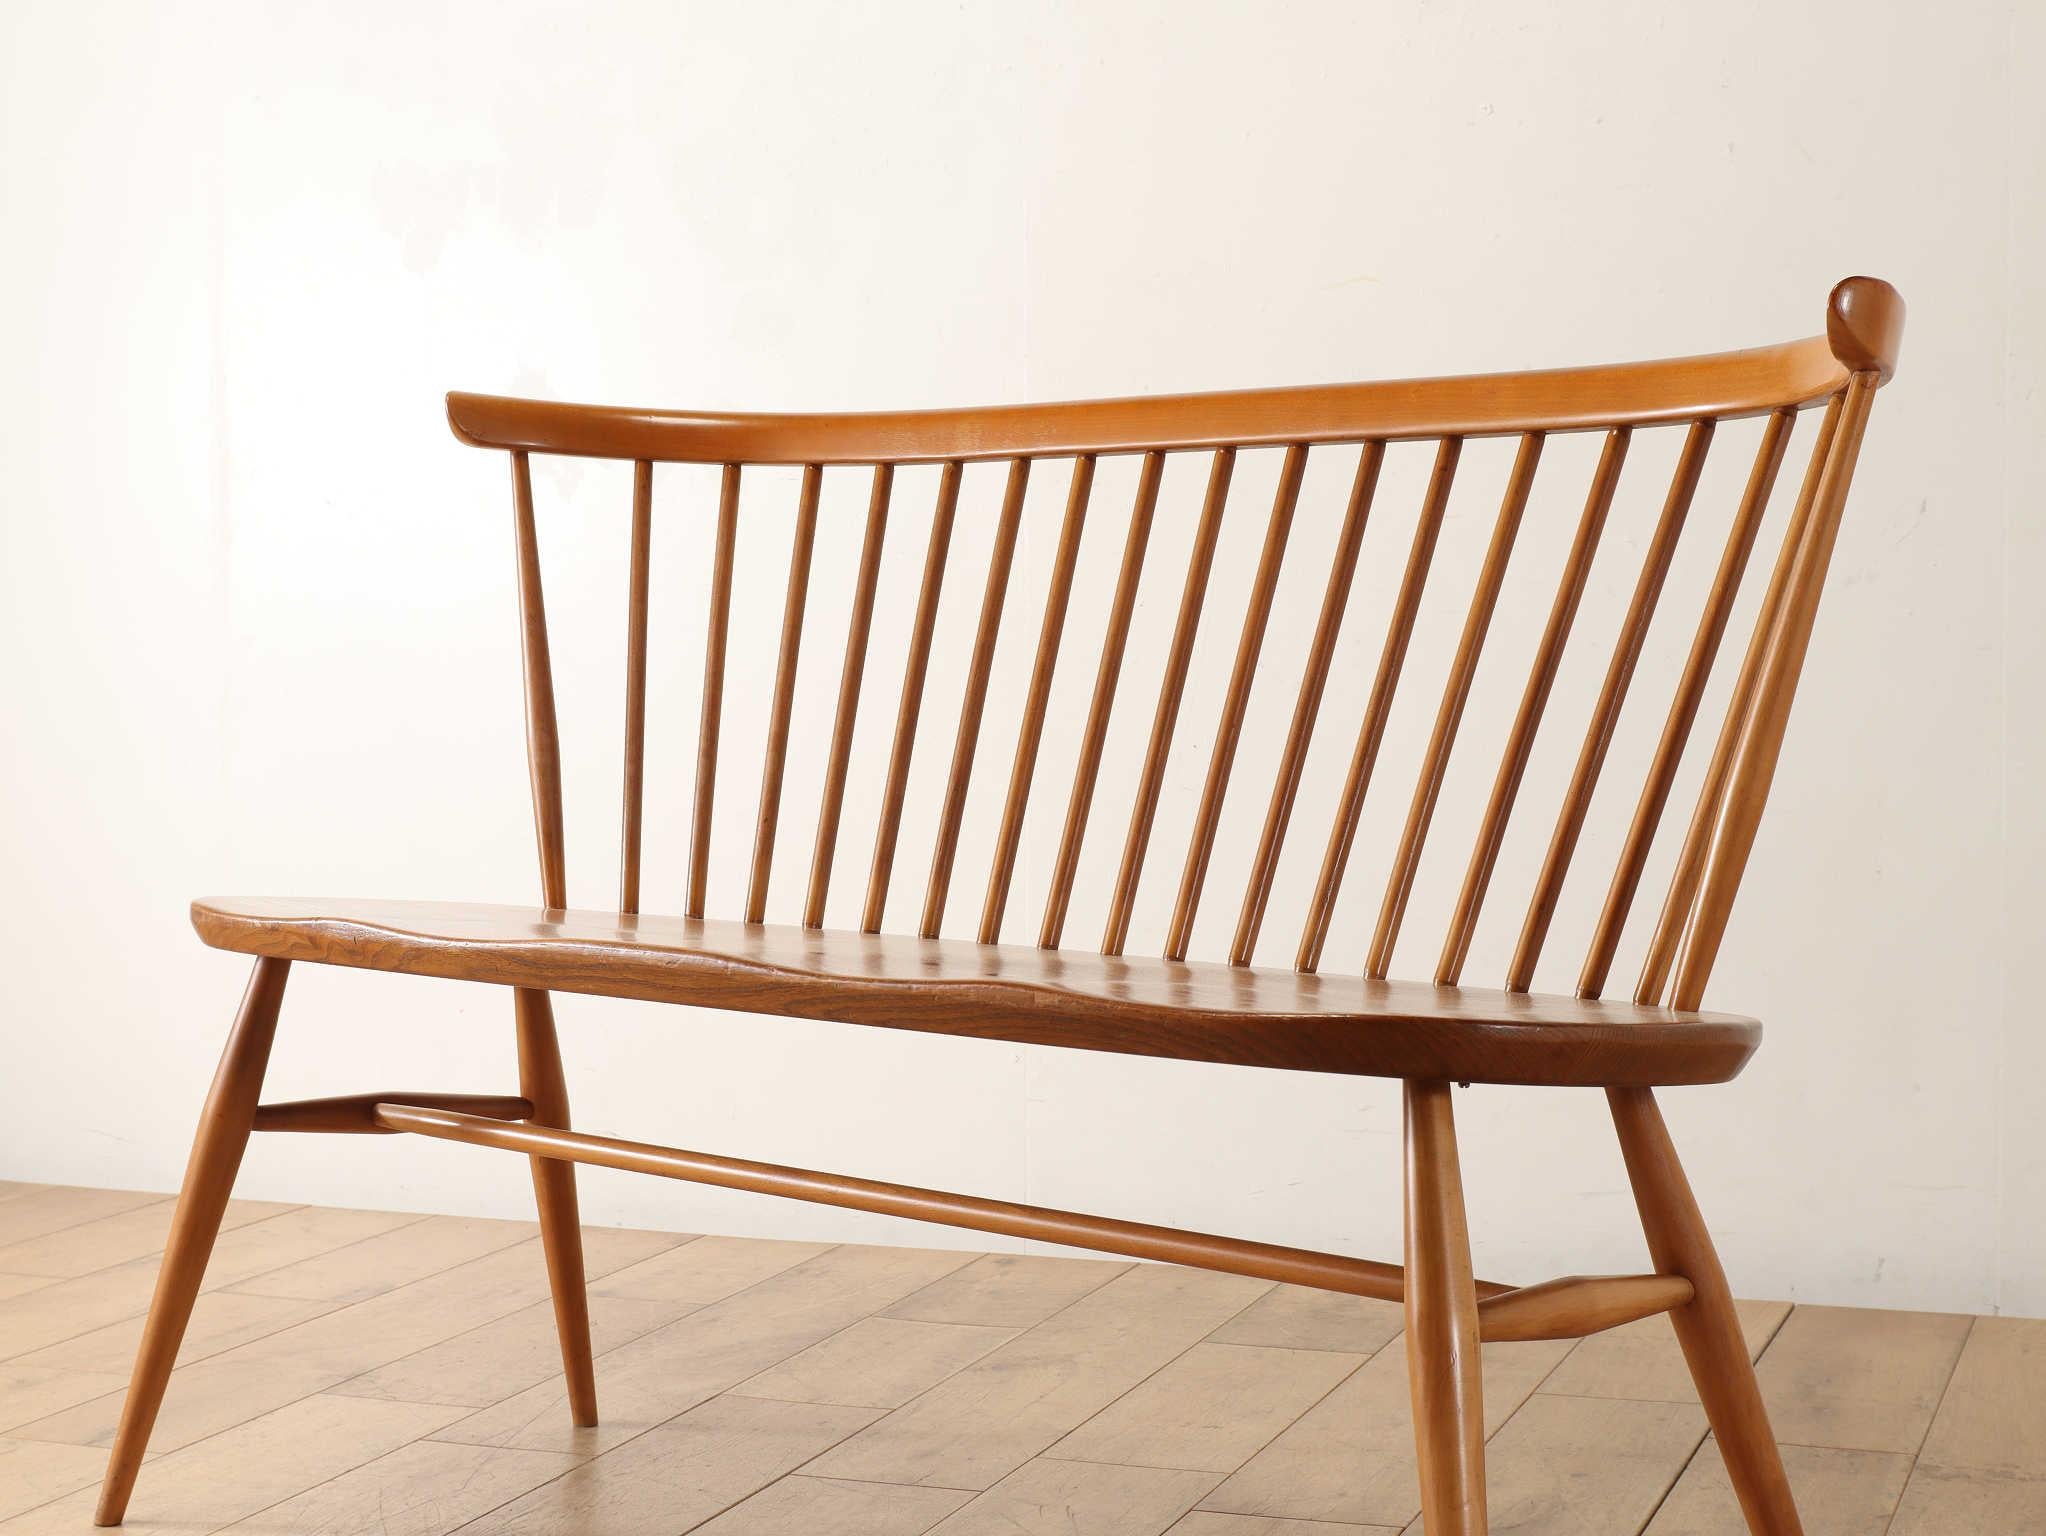 Beech 1970s Vintage Ercol Love Seat Bench For Sale